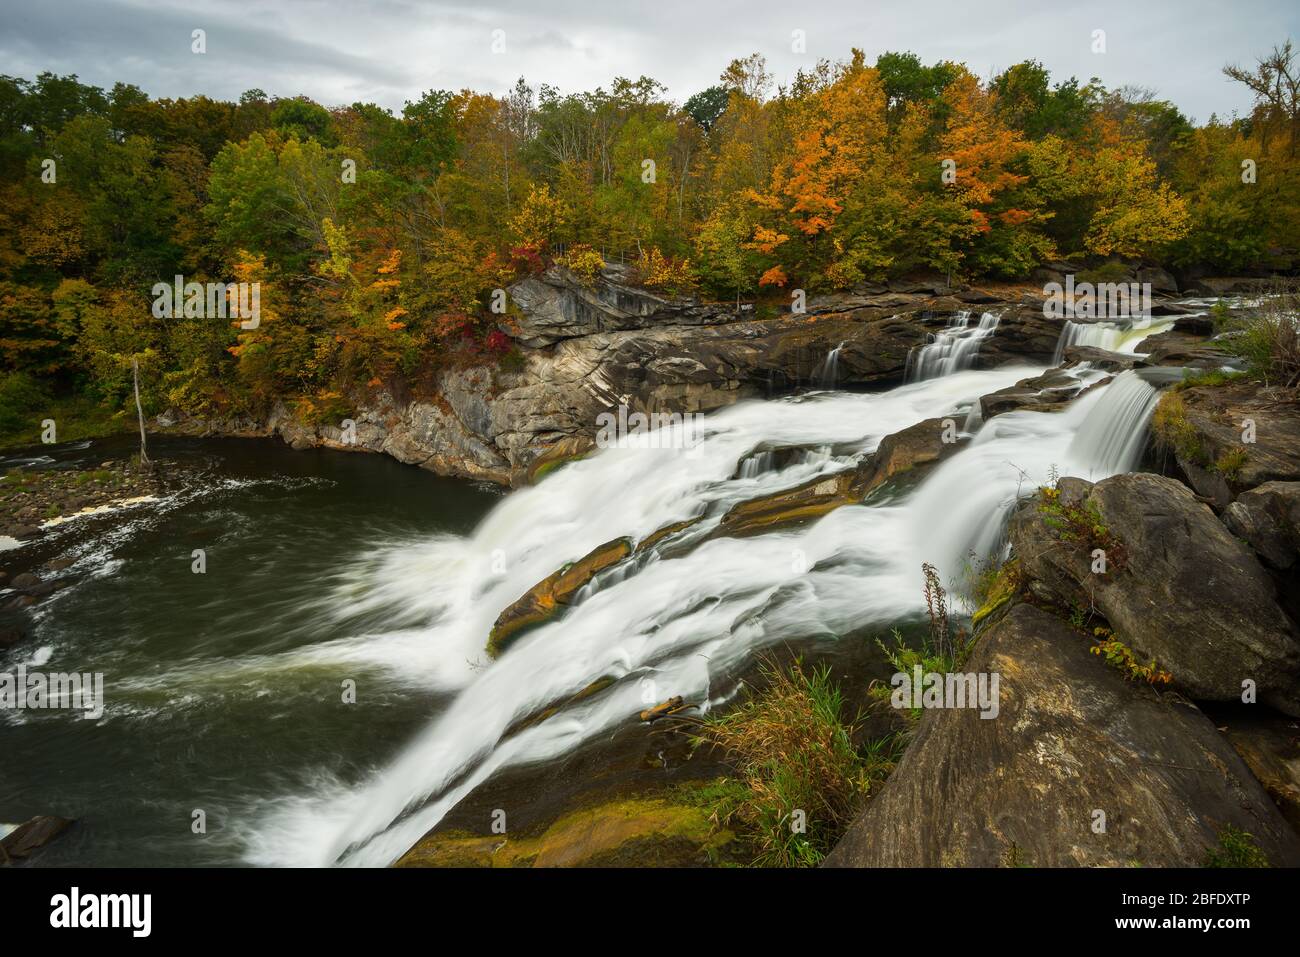 The waters of the Housatonic River furiously cascade over Great Falls amidst autumn woodlands (Canaan, Connecticut). Stock Photo